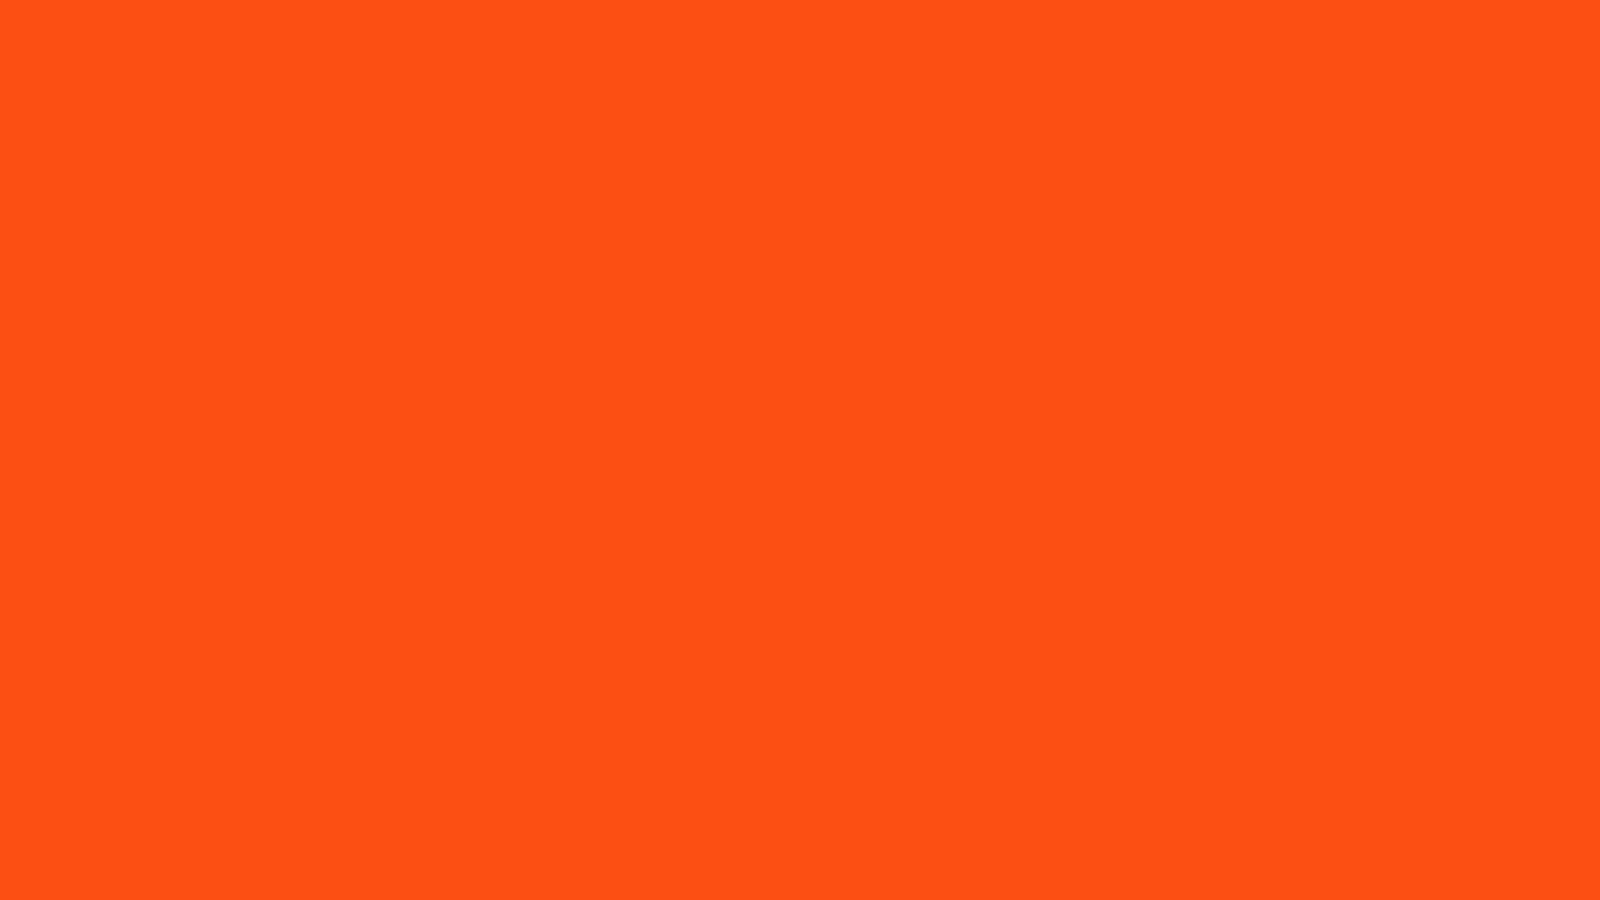 Free 1600x900 resolution Orioles Orange solid color background view 1600x900